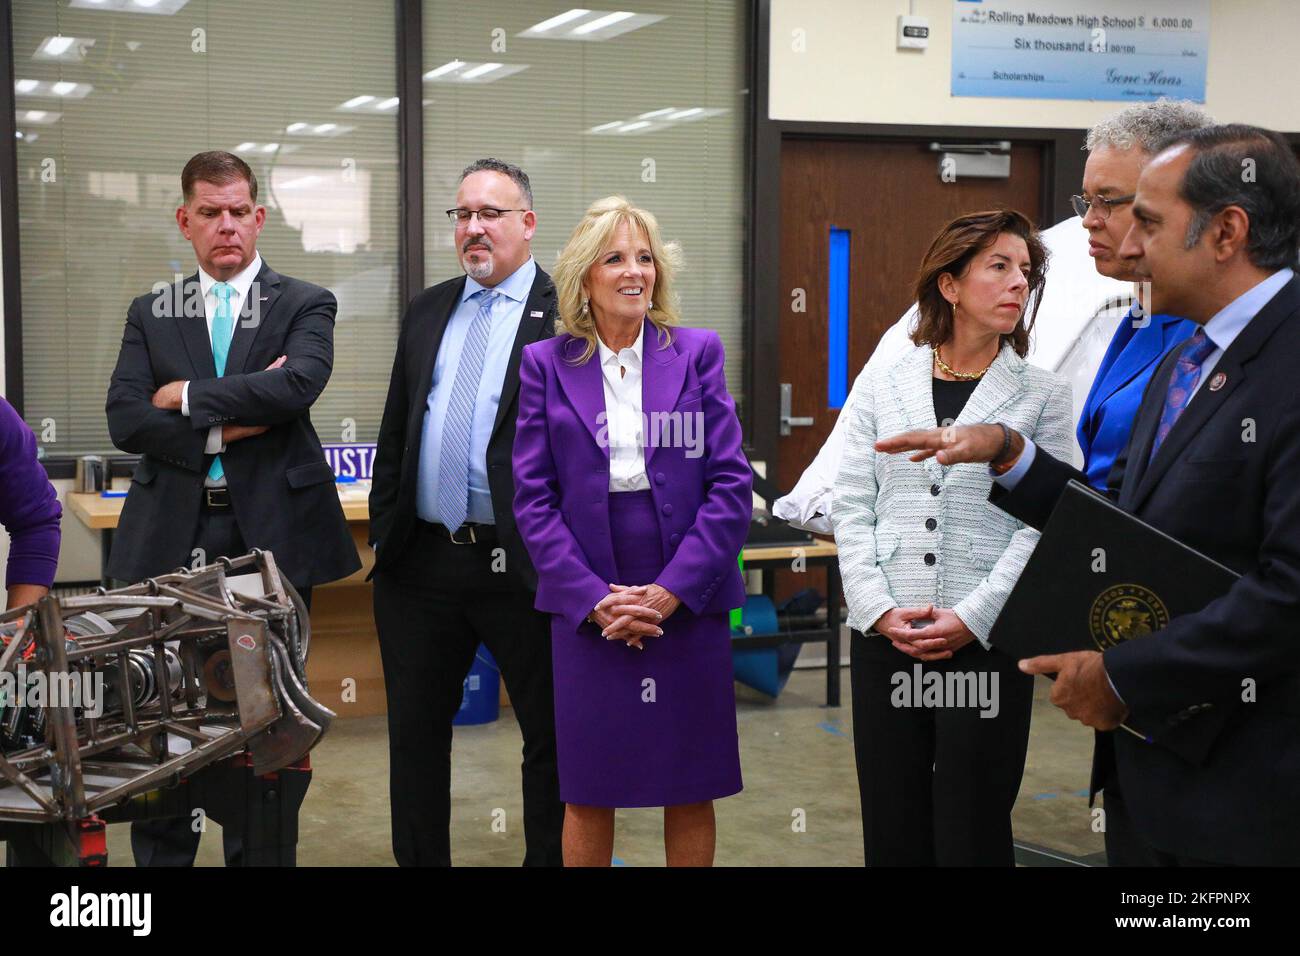 NOVEMBER 14 - CHICAGO, IL: U.S. Secretary of Labor Marty Walsh, U.S. Secretary of Education Miguel Cardona, First Lady Dr. Jill Biden, U.S. Secretary of Commerce Gina Raimondo and Cook County Board President Toni Preckwinkle visits Rolling Meadows High School for an educational roundtable with students and teachers on November 14, 2022 in Rolling Meadows, Illinois.  (Photo: Cruz Gutierrez/The Photo Access) Stock Photo